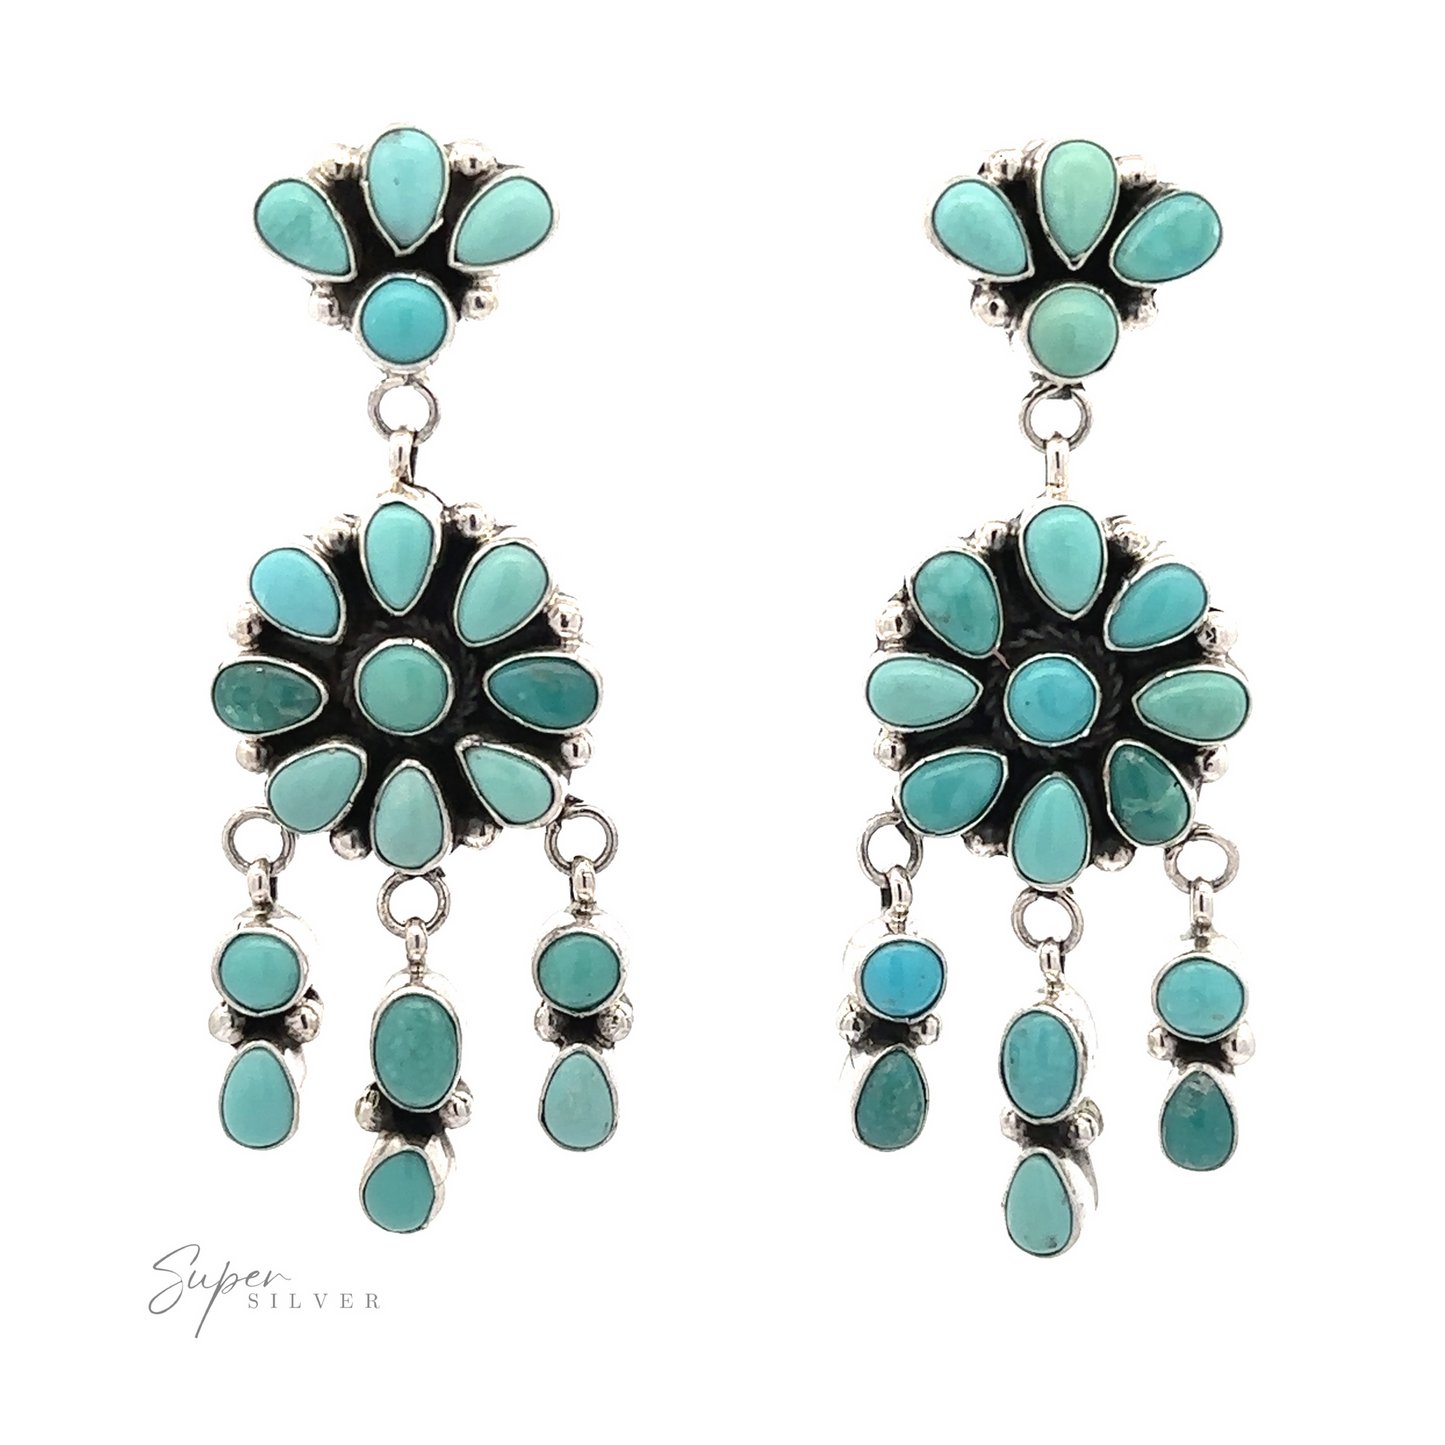 A pair of Native American Turquoise Flower Earrings in a floral design, showcasing exquisite Native American craftsmanship, isolated on a white background with "super silver" text logo at the bottom.